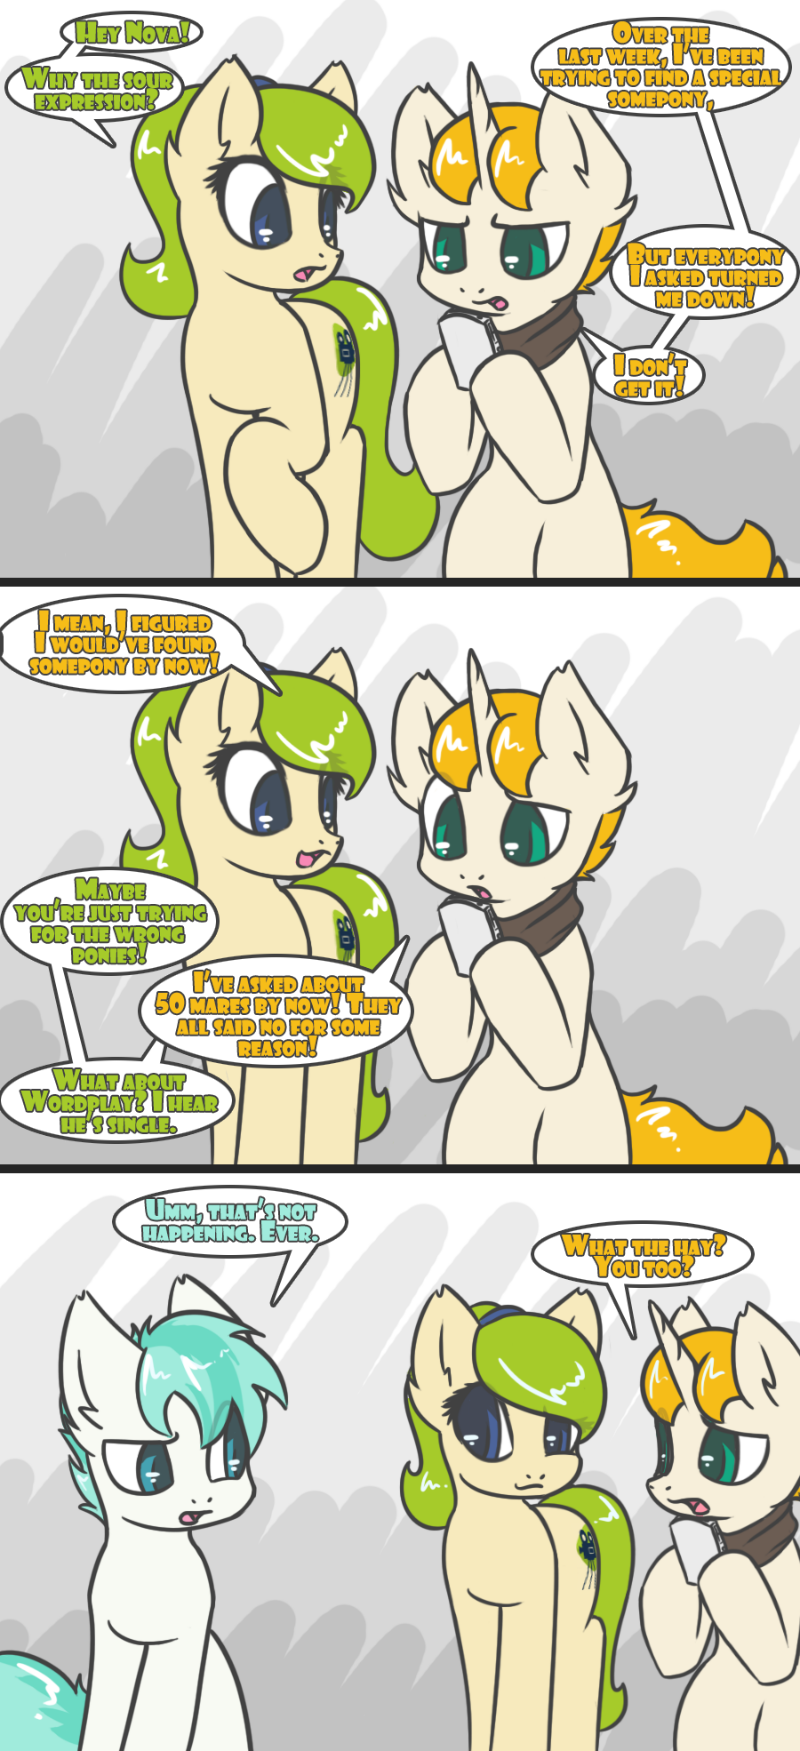 Page 10 - Hearts and day, anypony? p2